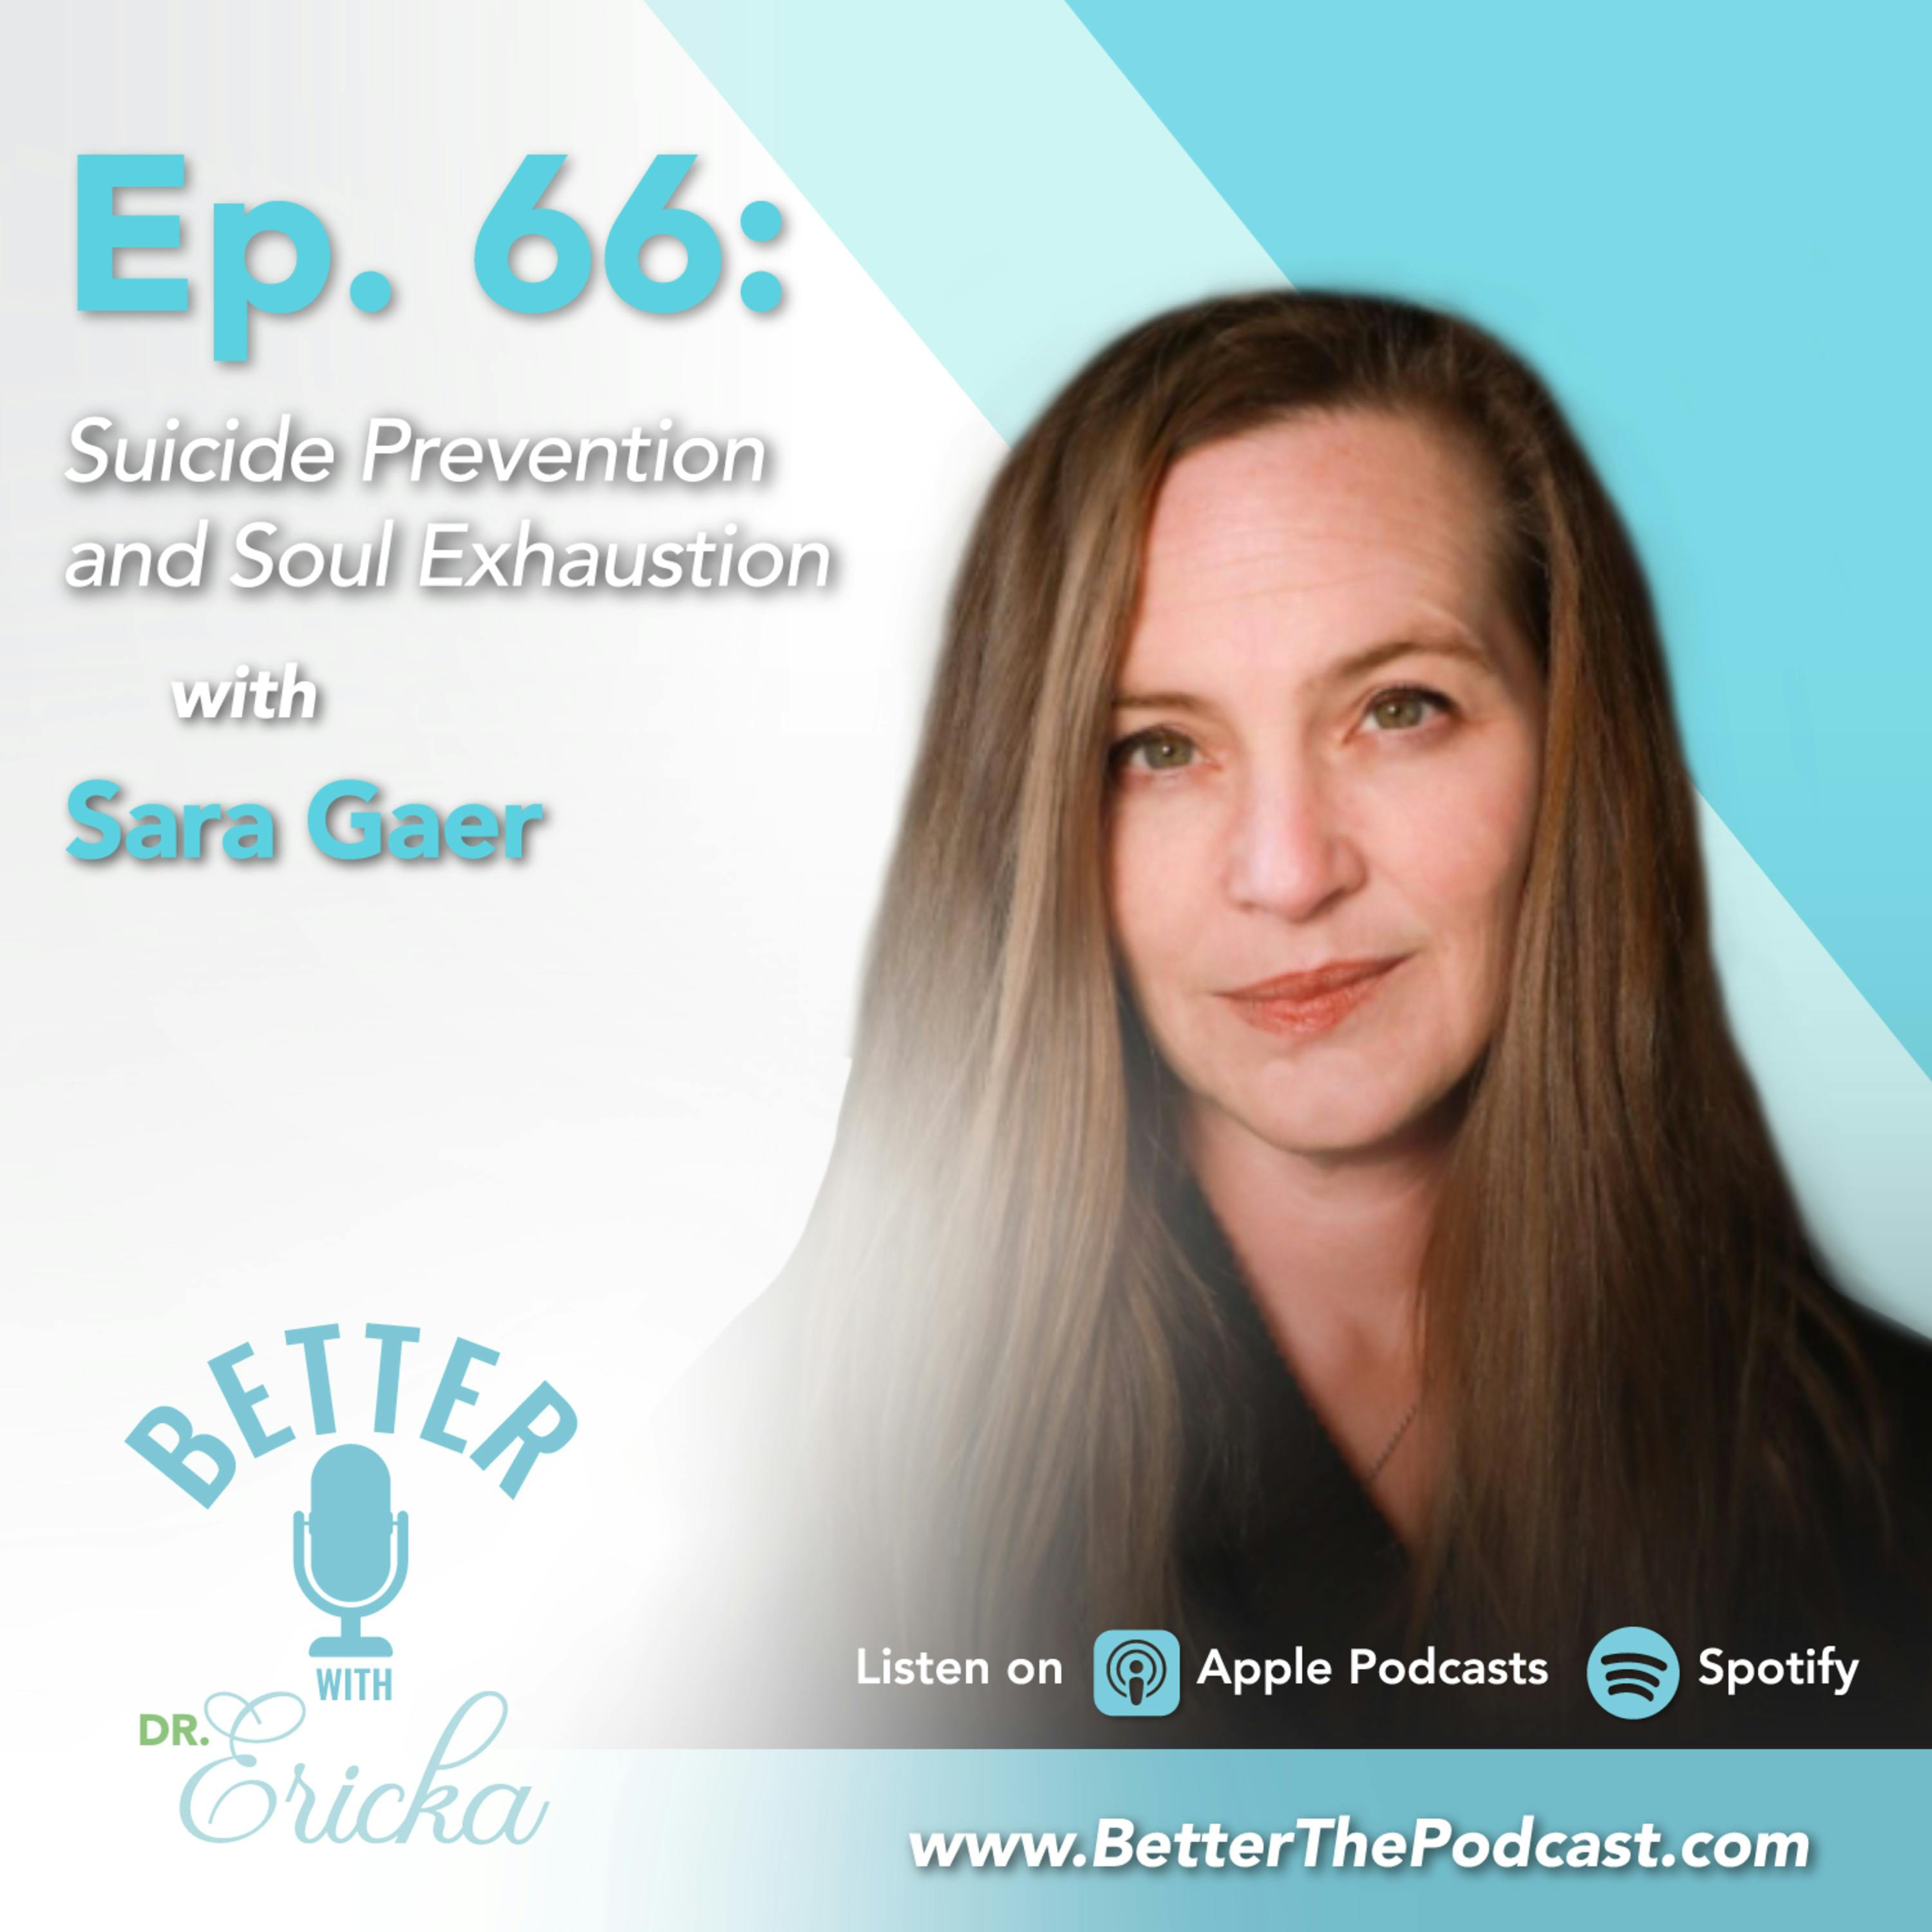 Suicide Prevention and Soul Exhaustion with Sara Gaer